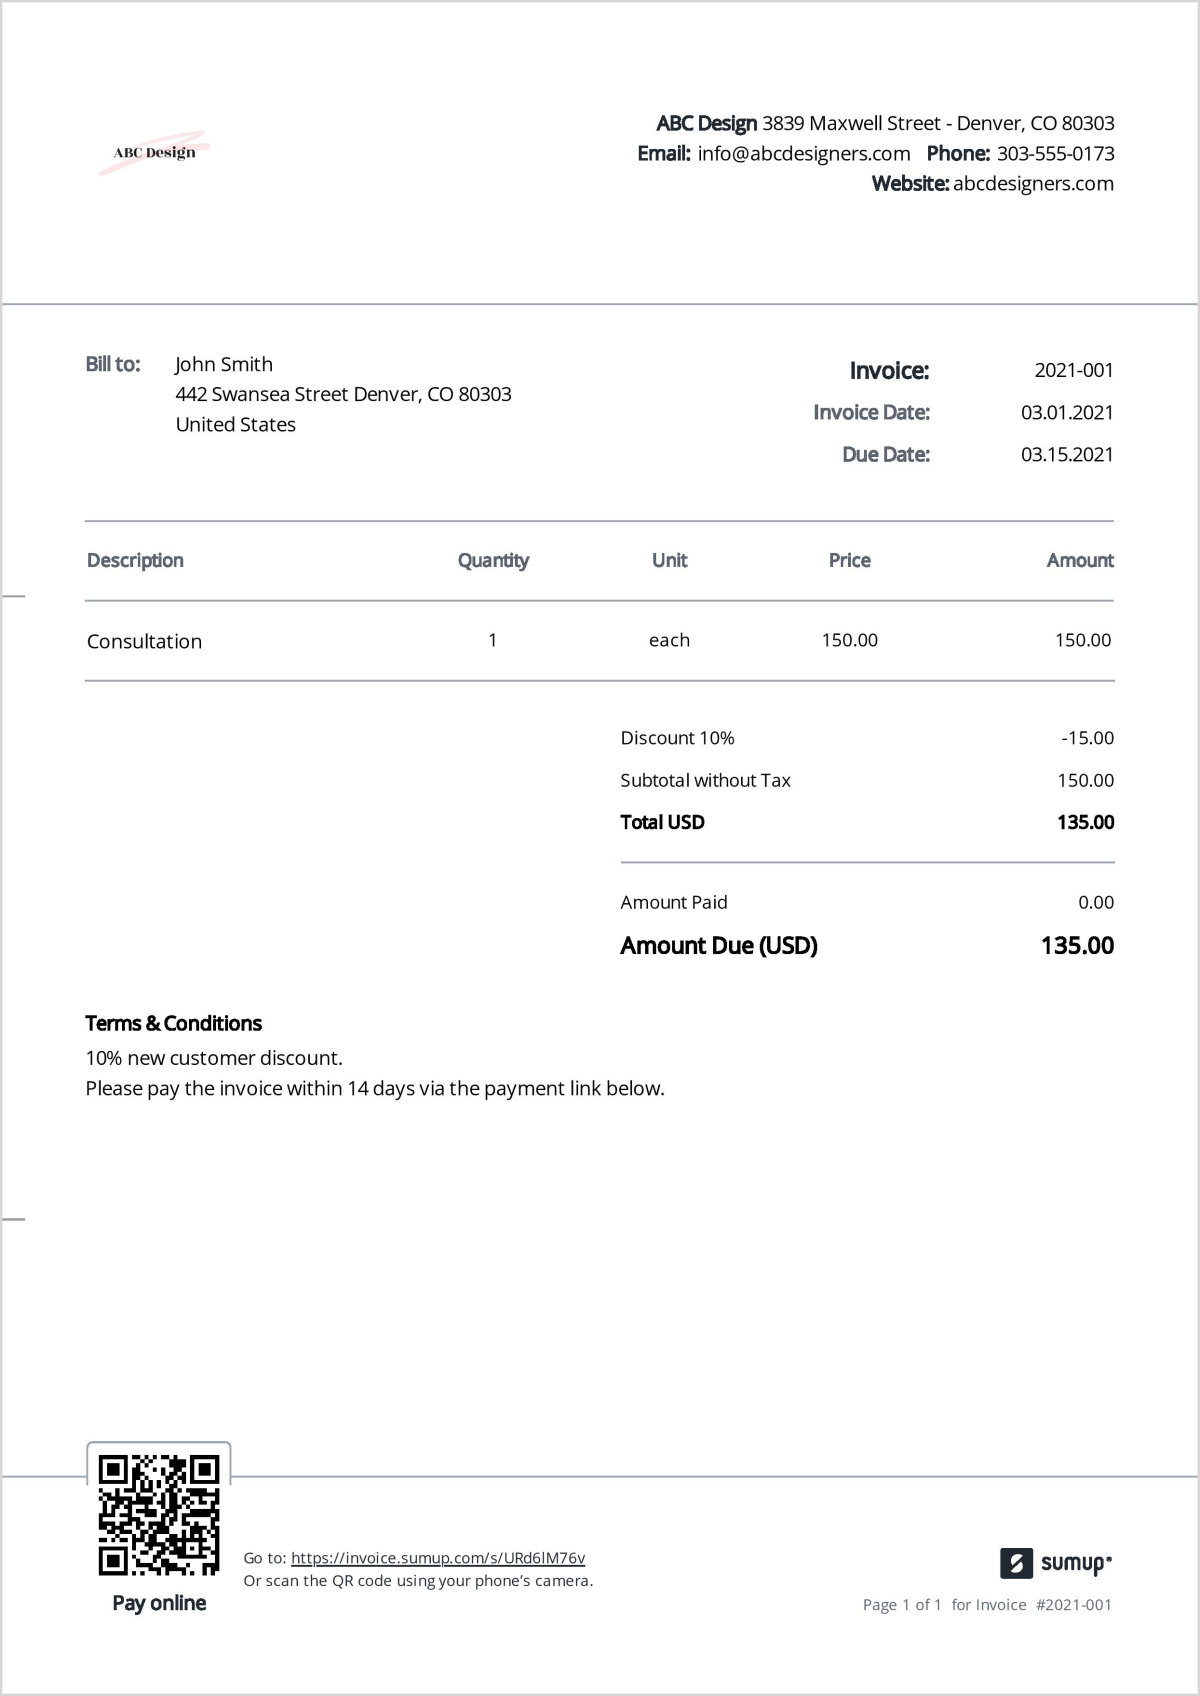 Invoice example created with SumUp Invoices